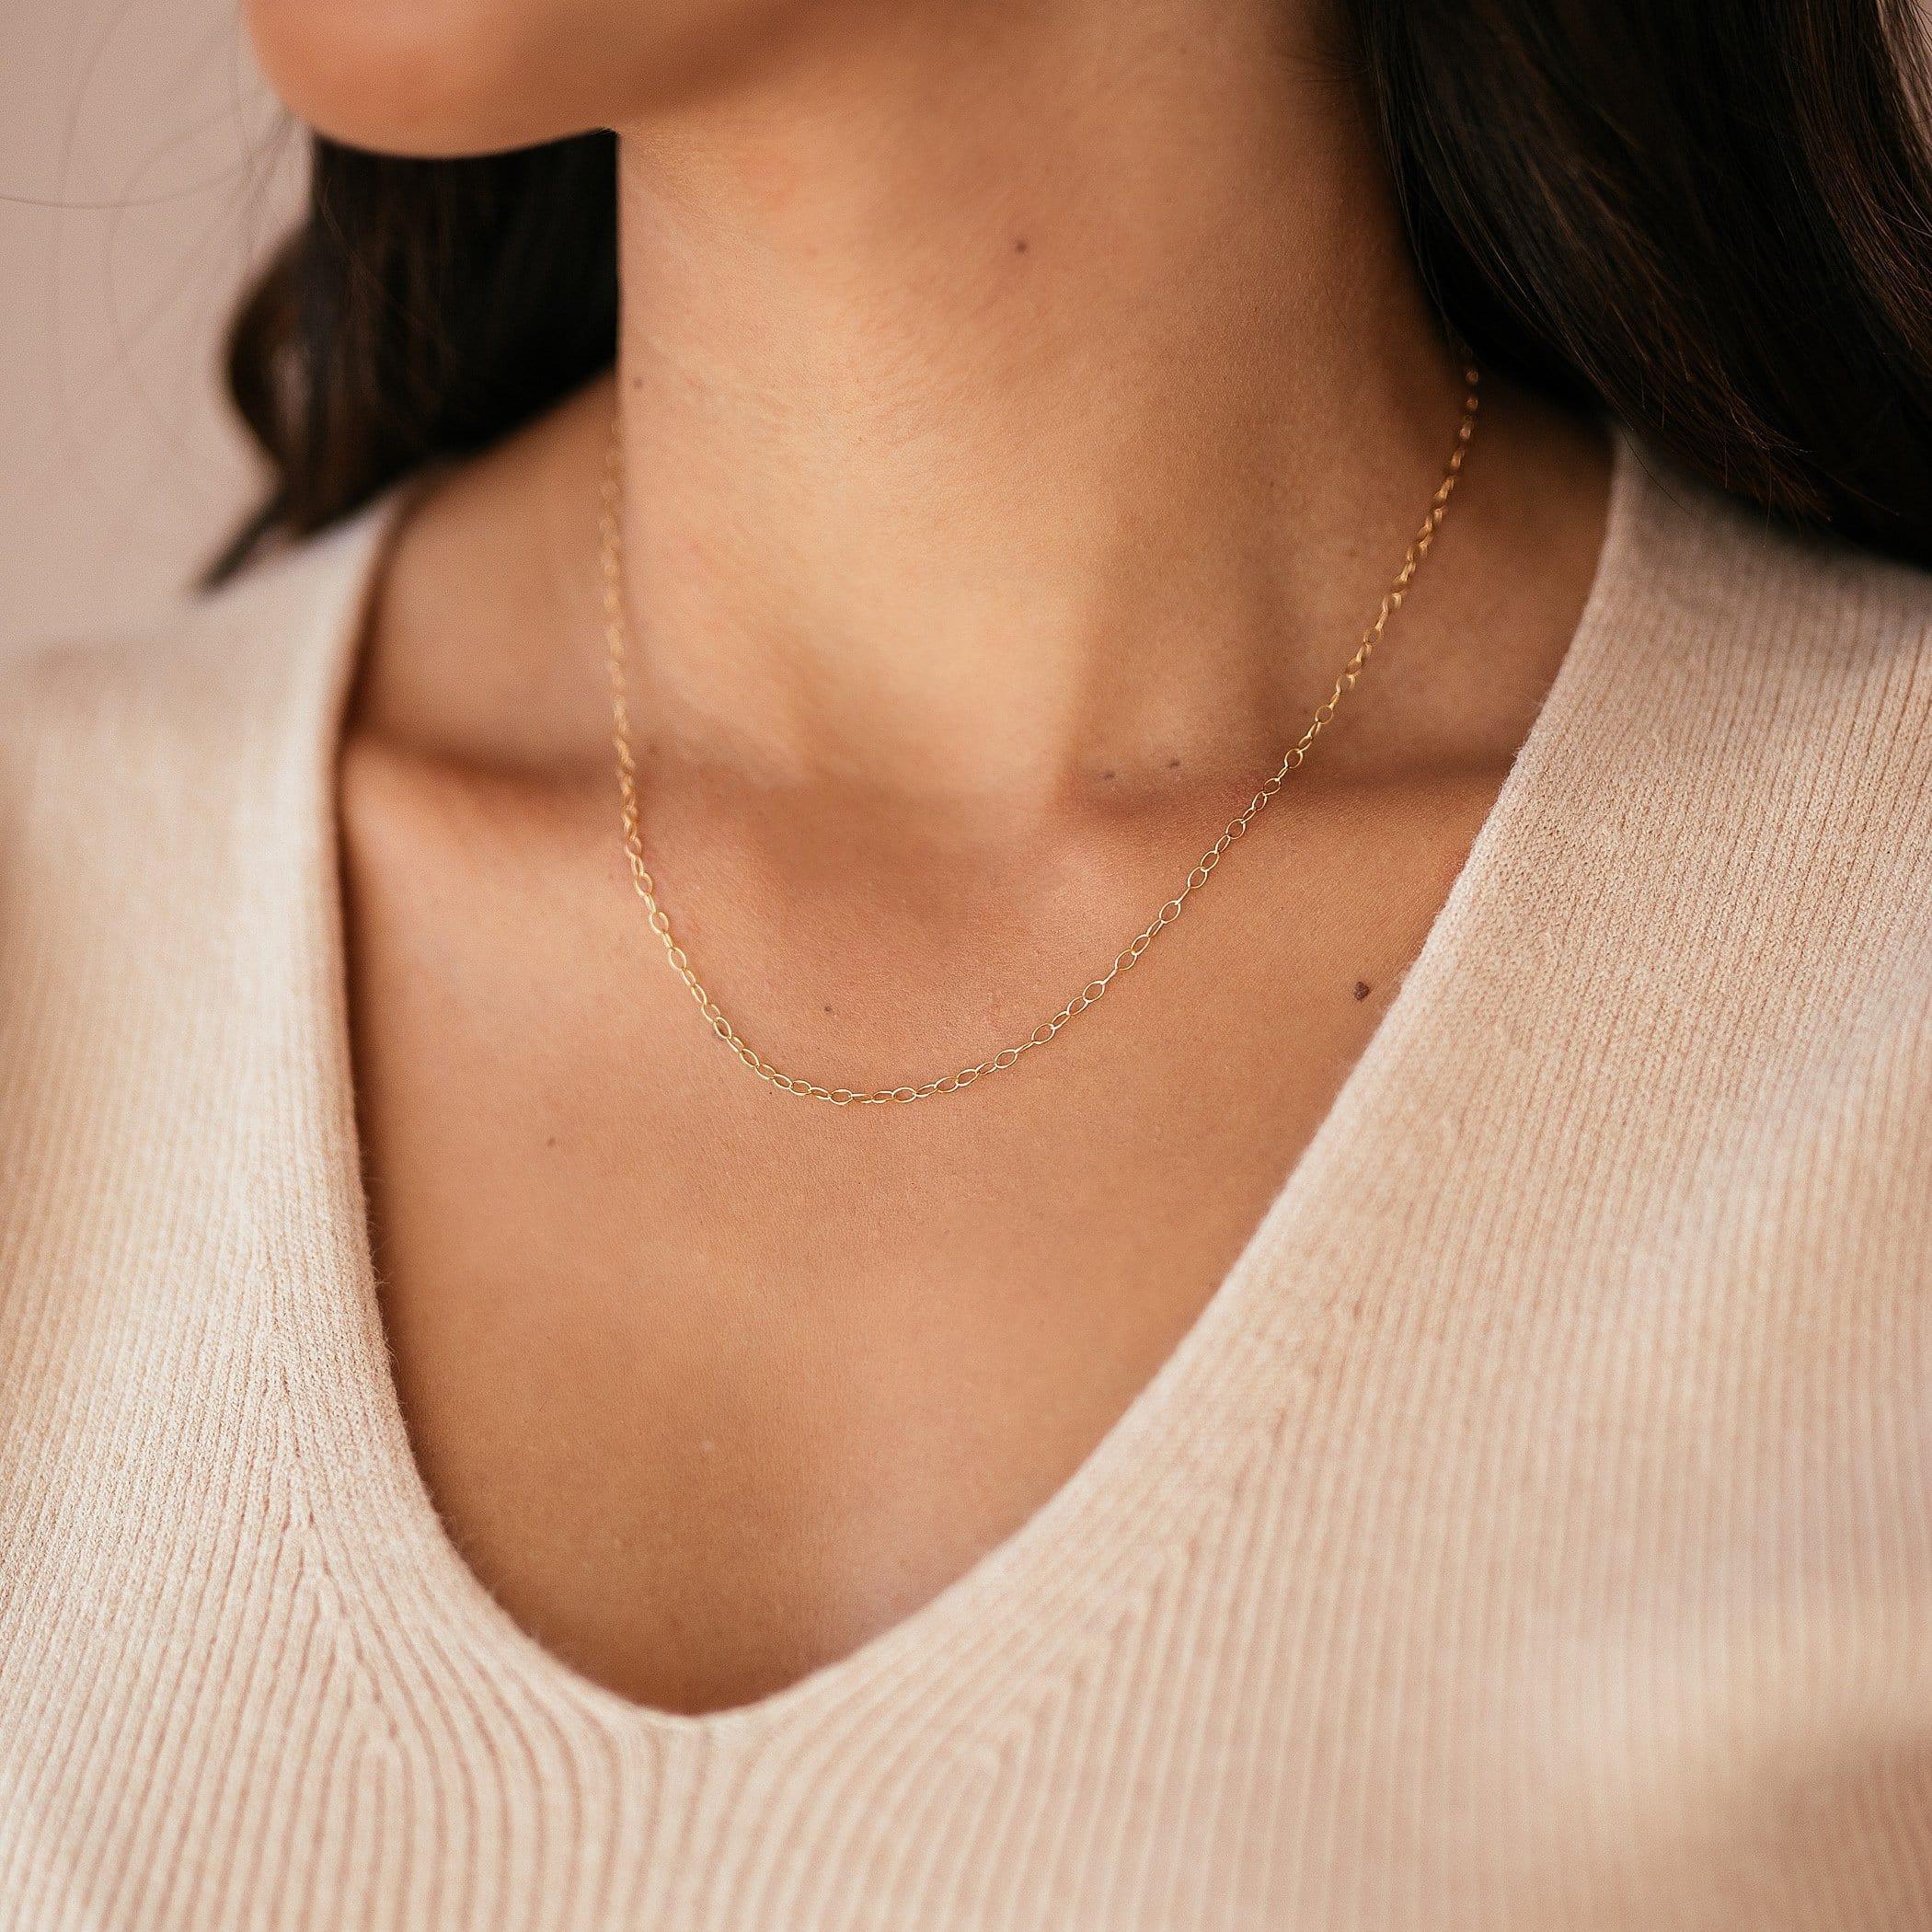 Minimalist Chain Necklace - Nolia Jewelry - Meaningful + Sustainably Handcrafted Jewelry